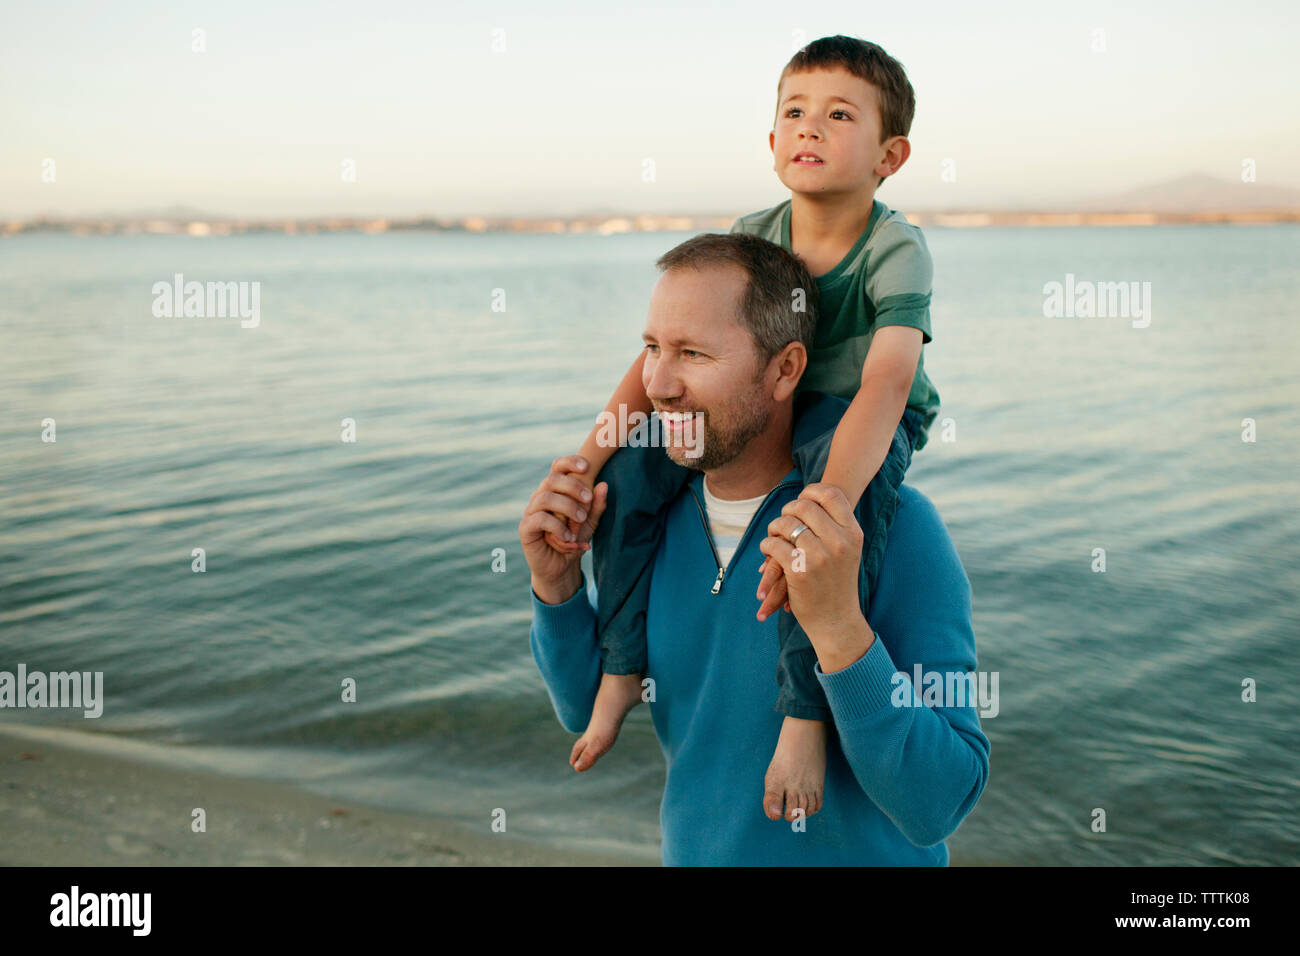 Father carrying son on shoulders at beach Stock Photo